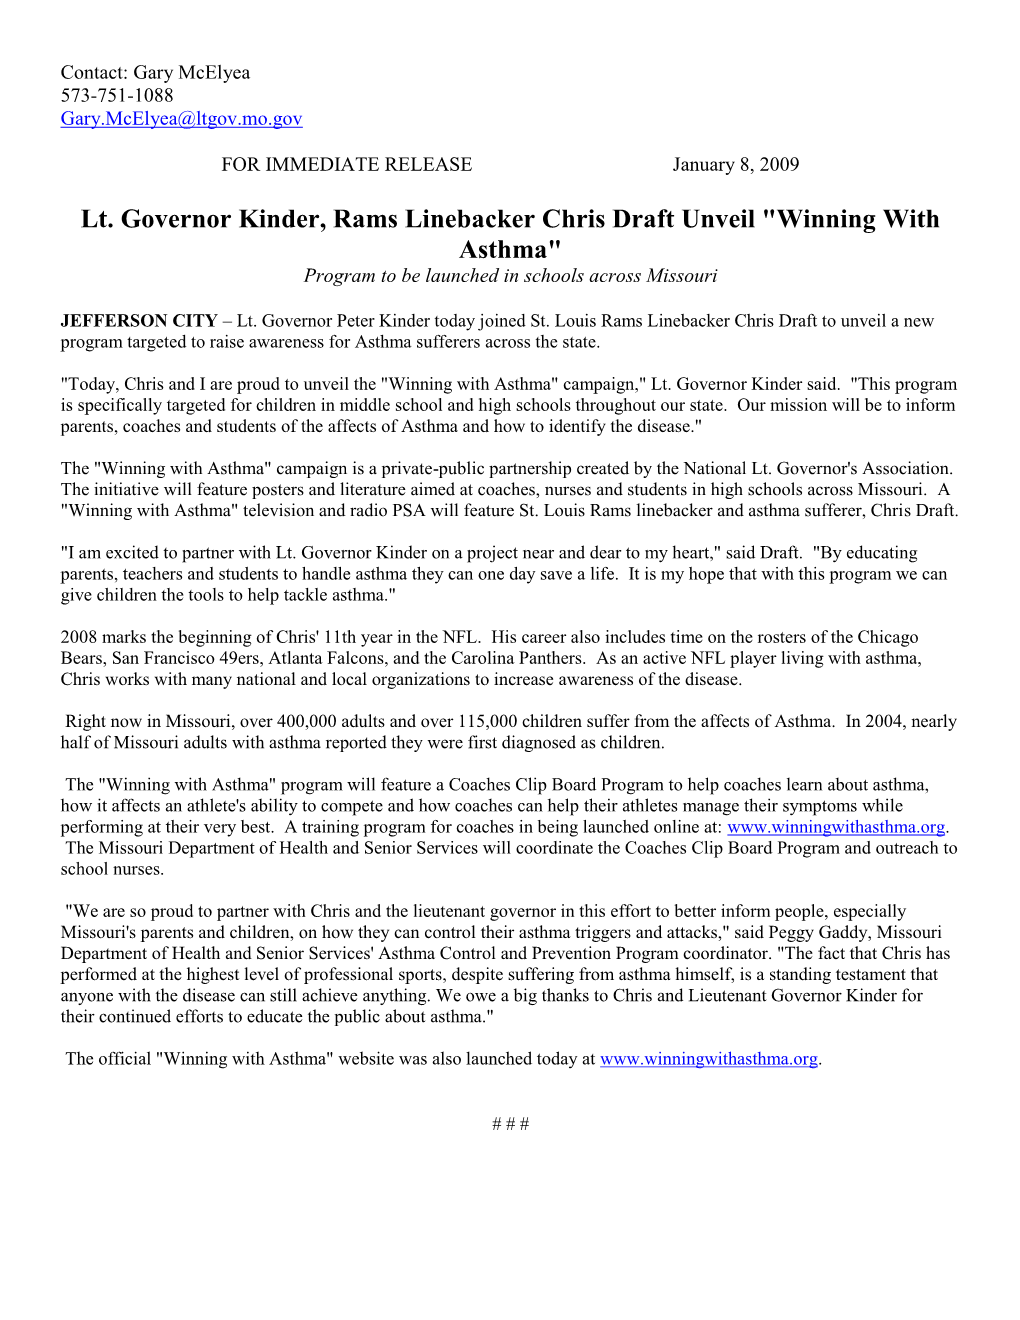 Lt. Governor Kinder, Rams Linebacker Chris Draft Unveil "Winning with Asthma" Program to Be Launched in Schools Across Missouri